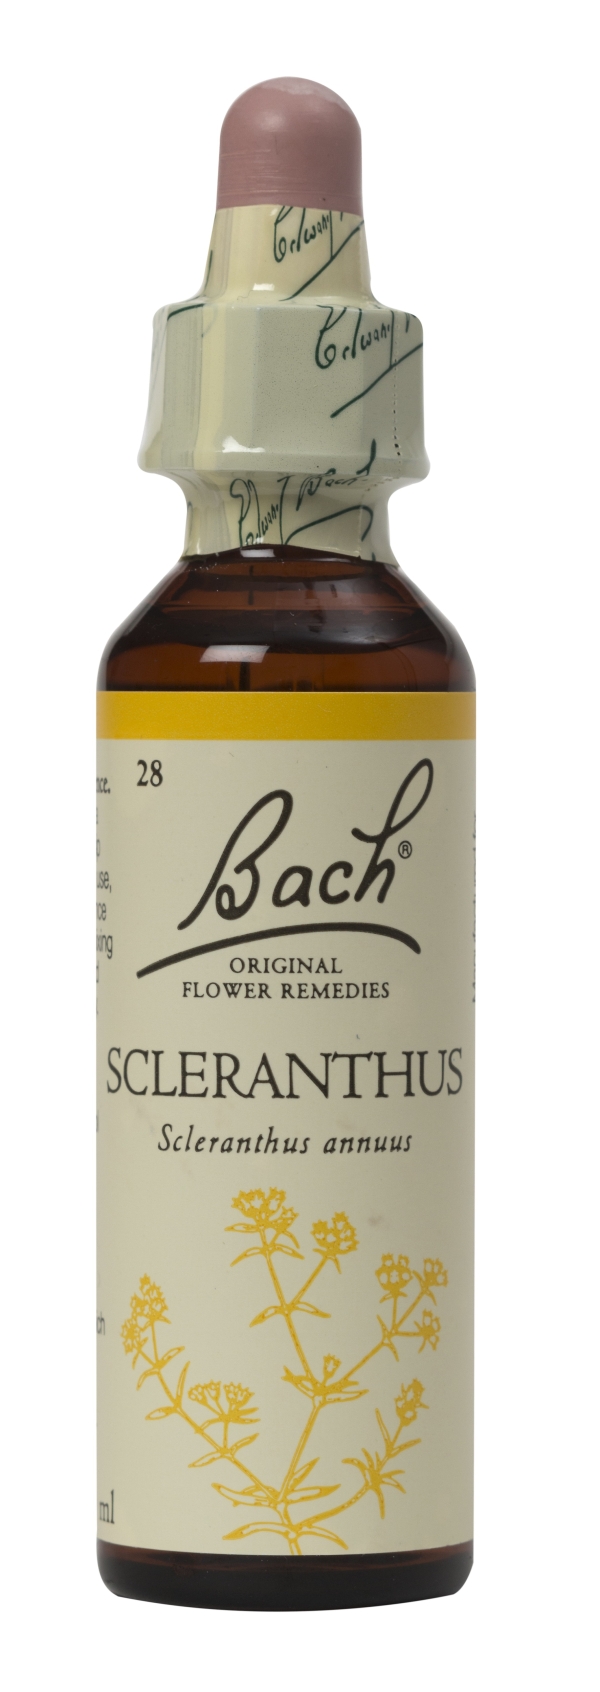 Nelson Bach Flower Remedies: Bach Scleranthus Flower Remedy (20ml) available online here